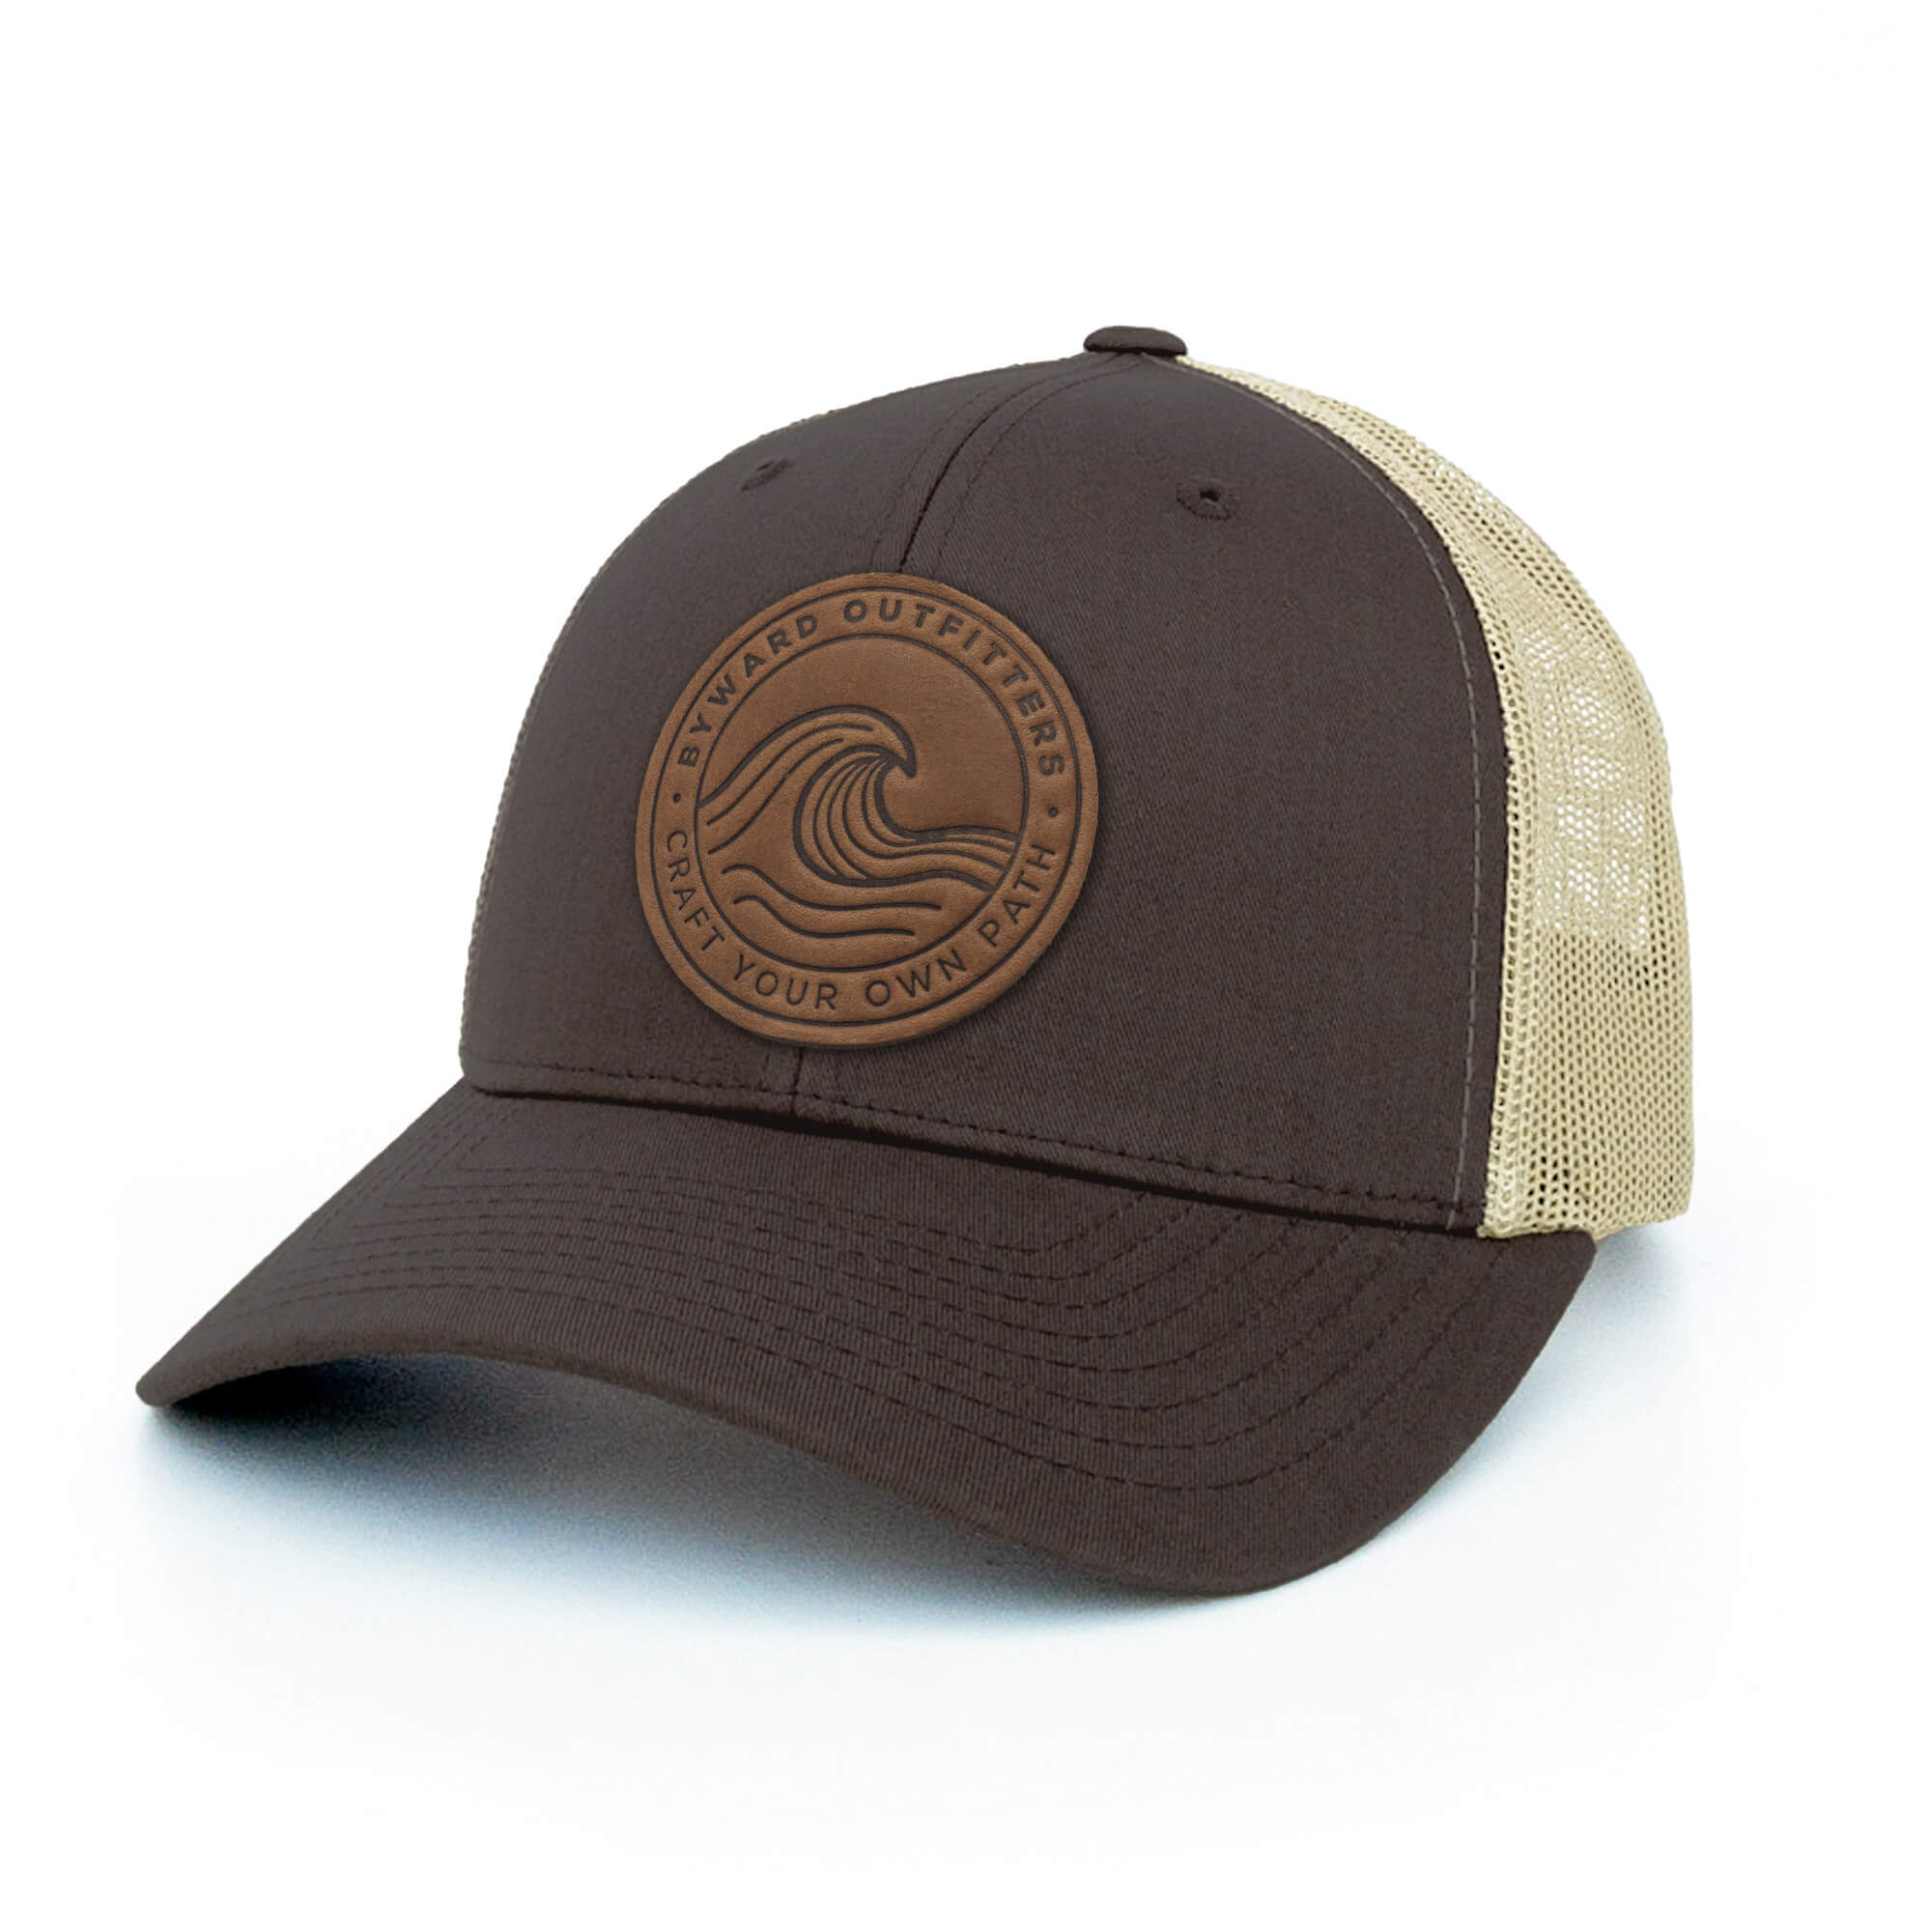 Brown and khaki trucker hat with full-grain leather patch of a Rolling Wave | BLACK-005-003, CHARC-005-003, NAVY-005-003, HGREY-005-003, MOSS-005-003, BROWN-005-003